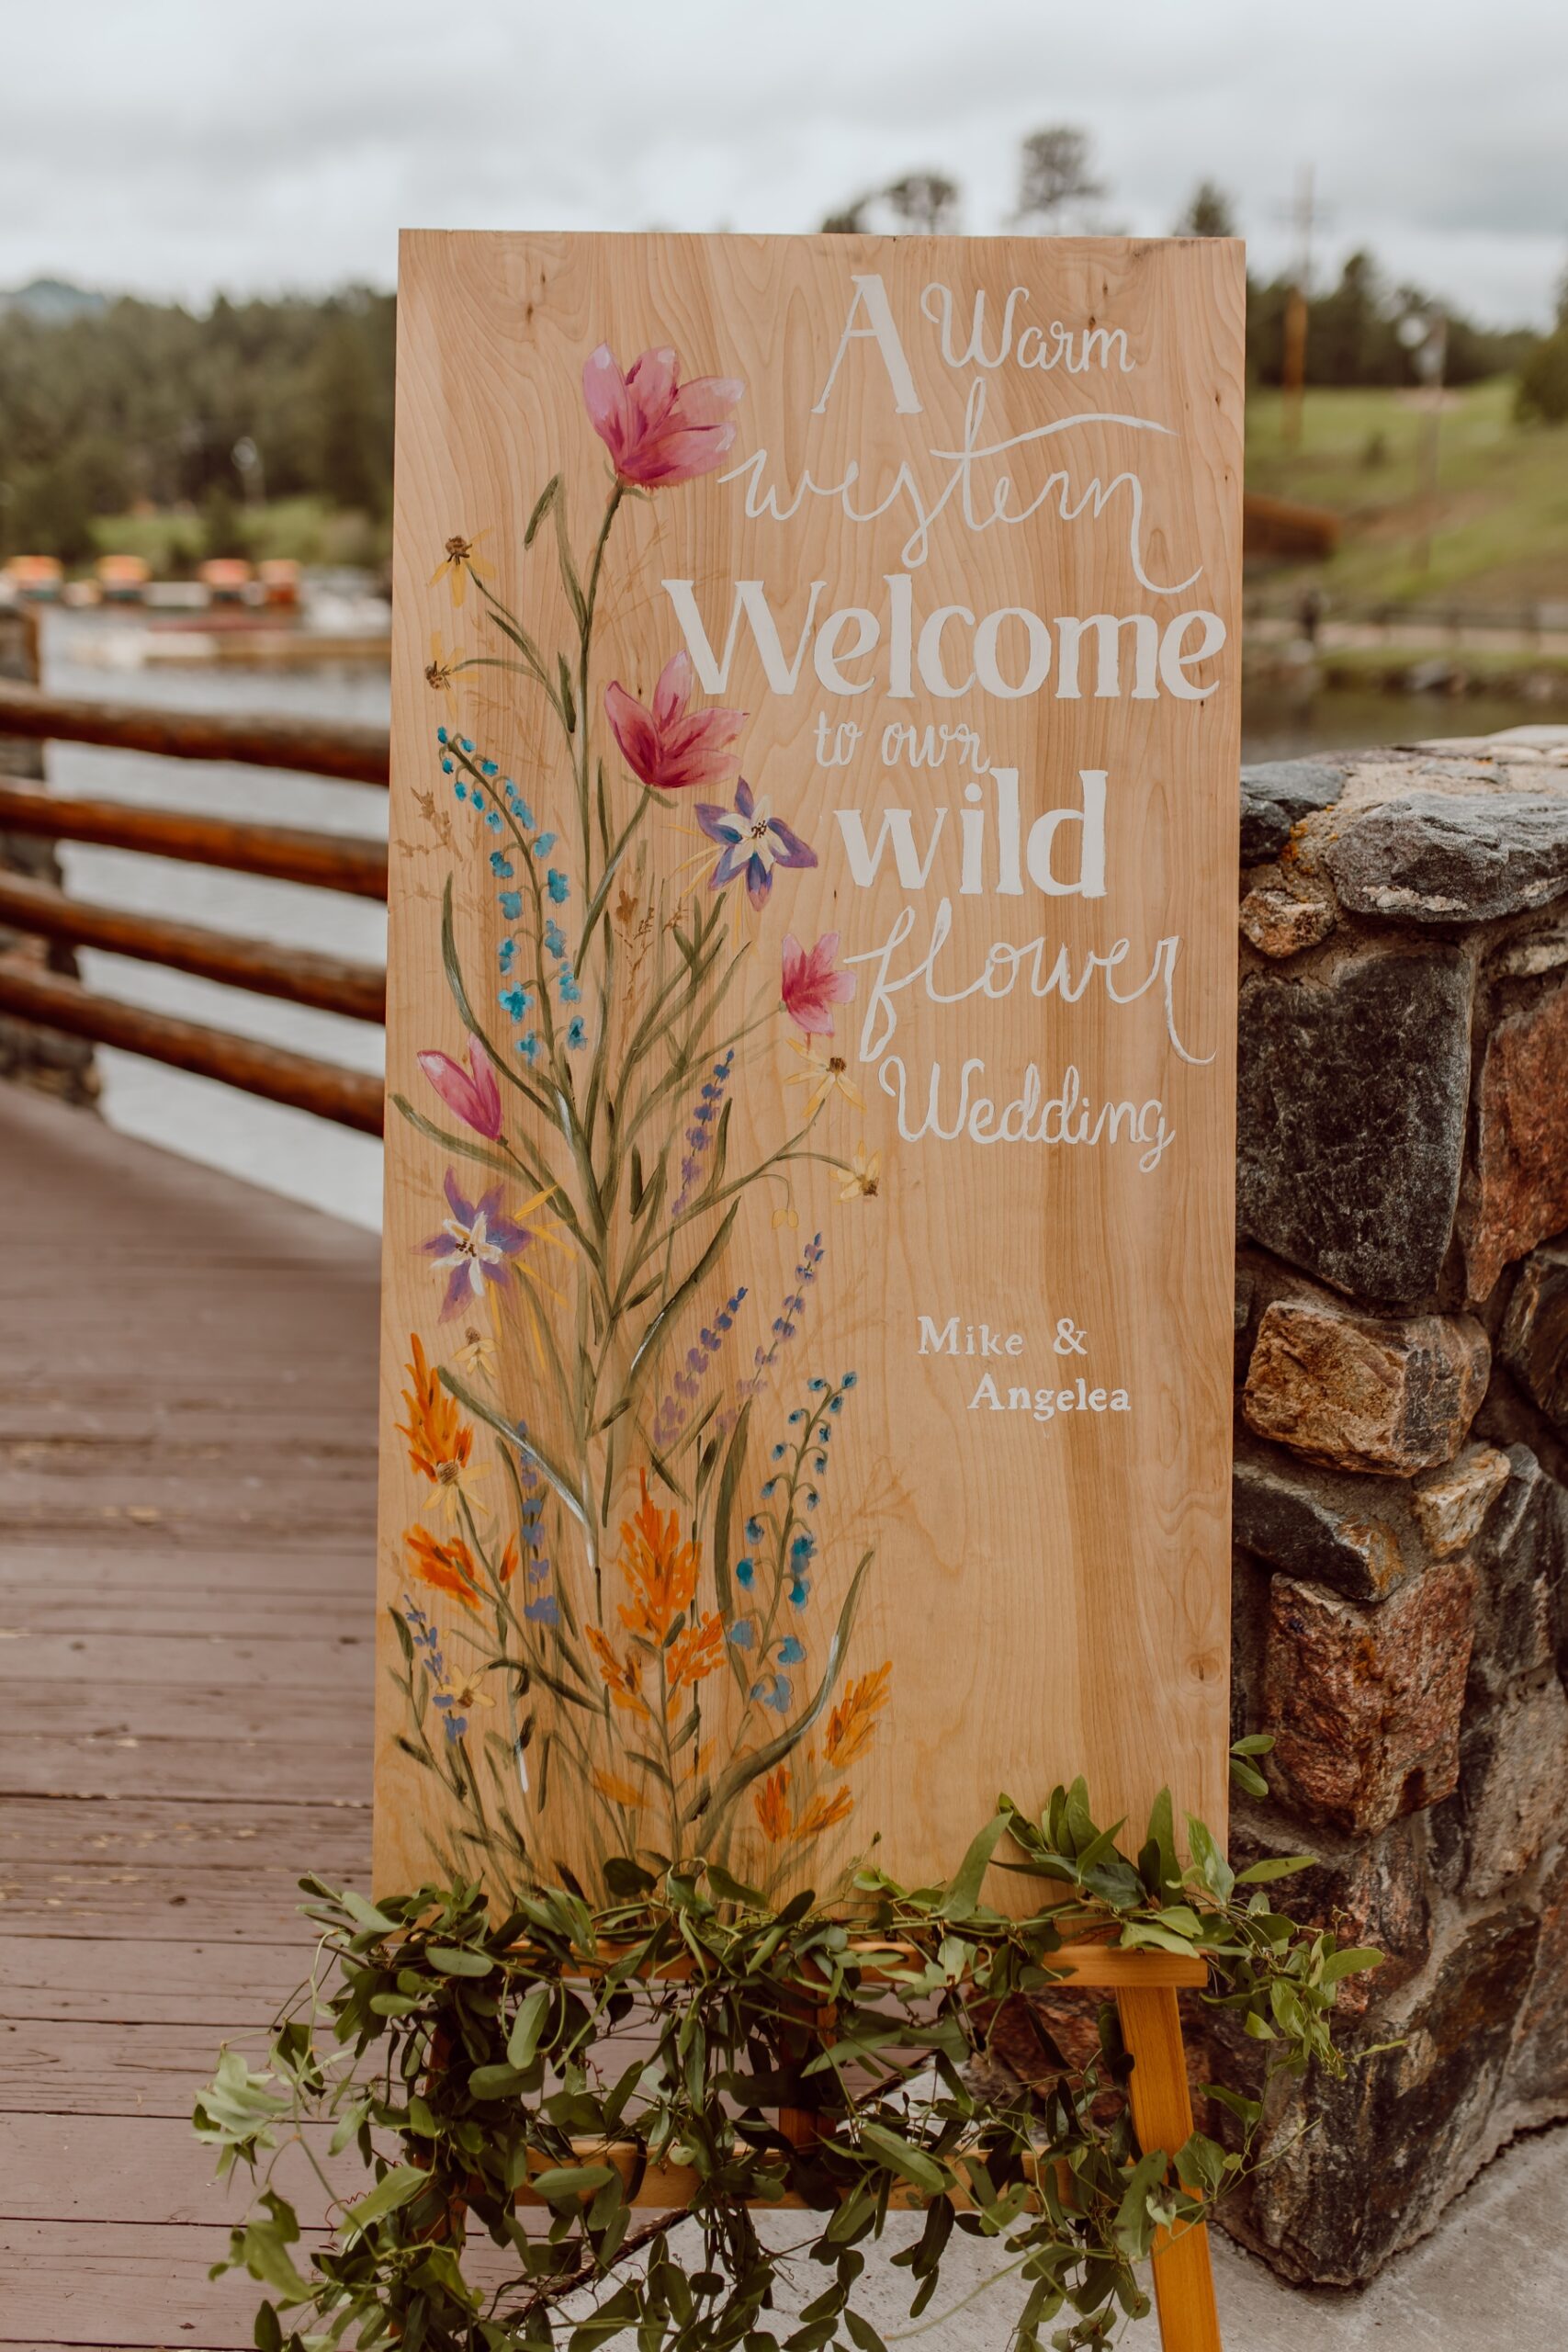 Handpainted wedding welcome sign with western and wildflower touches